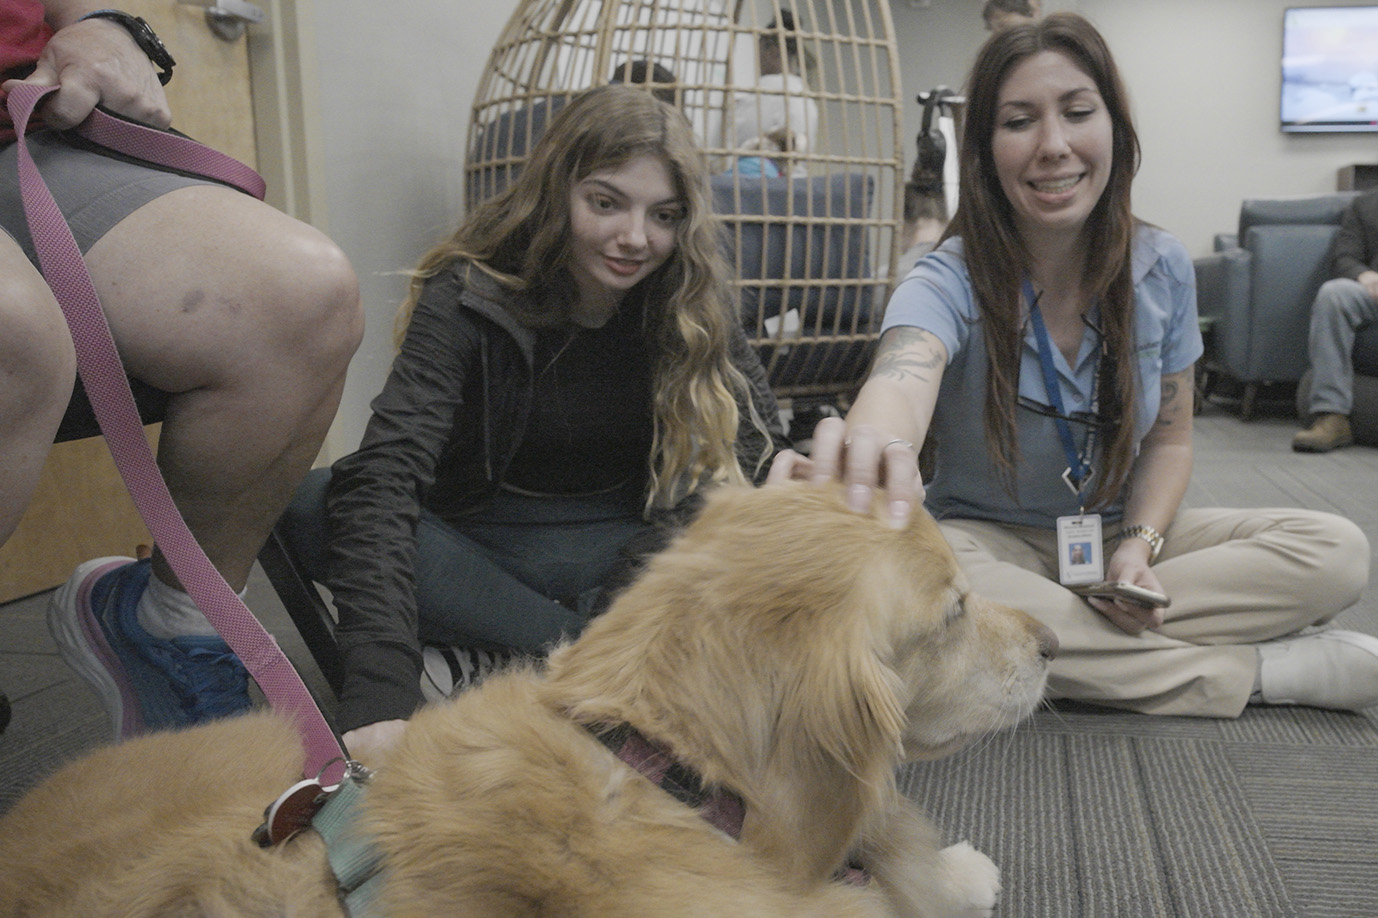 Two women sitting on the floor petting a golden retriever.